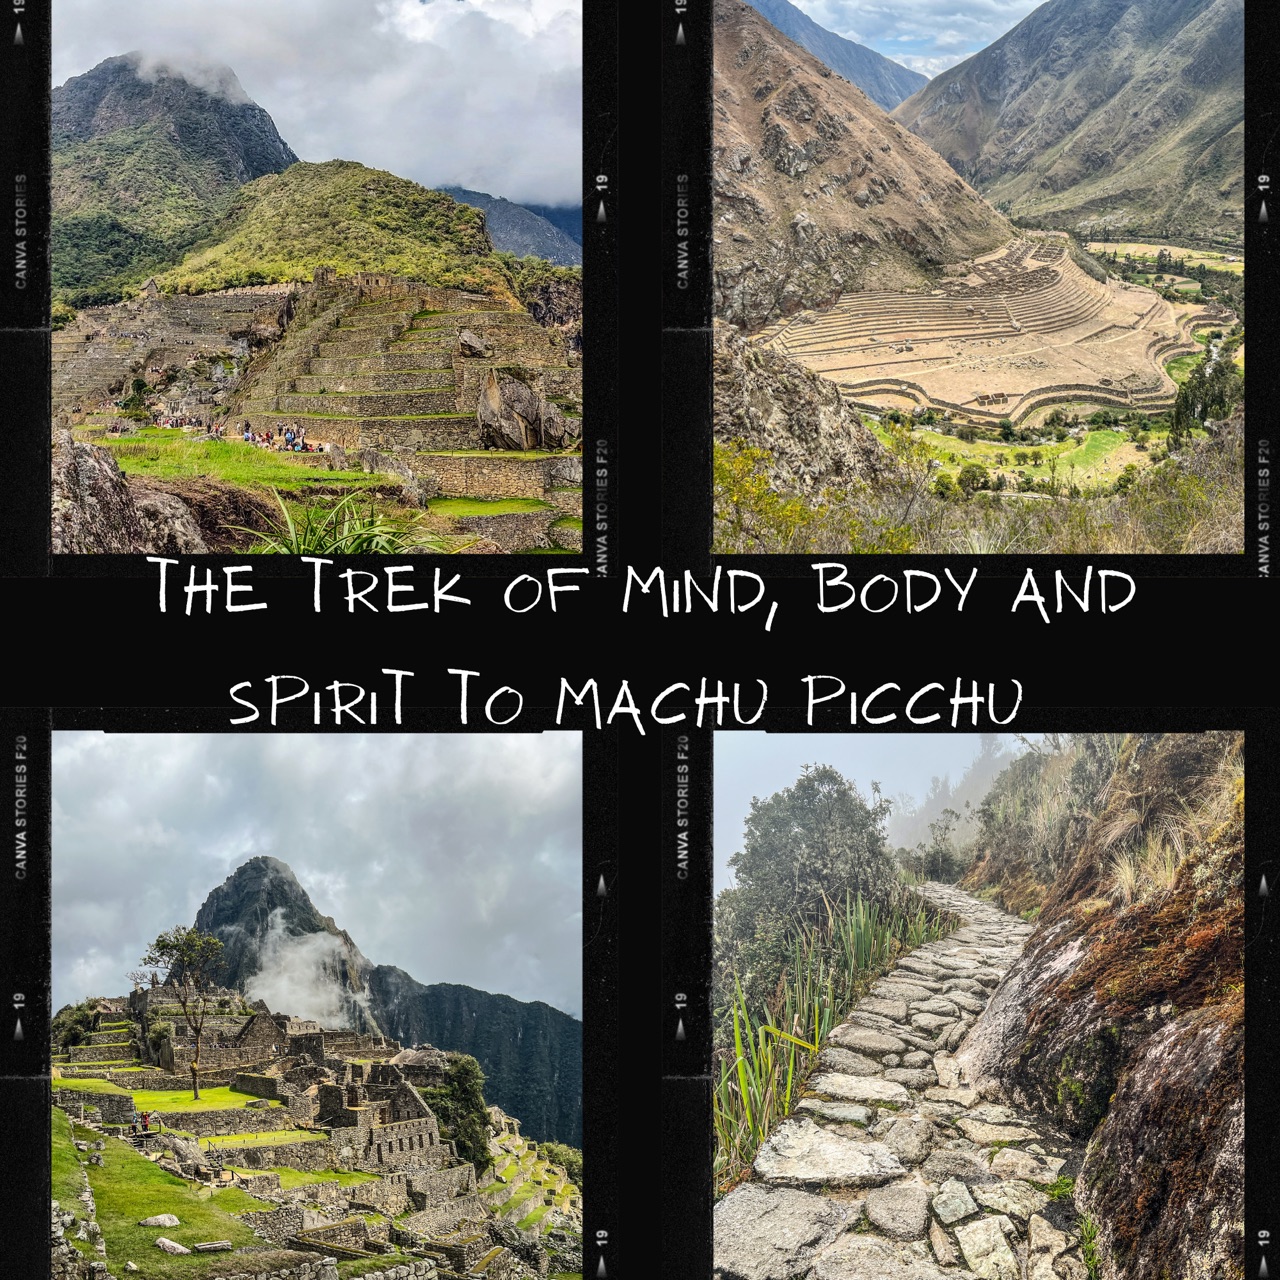 My Grueling Journey on the 4-day Inca Trail: A Definite Test of Mind, Body & Spirit